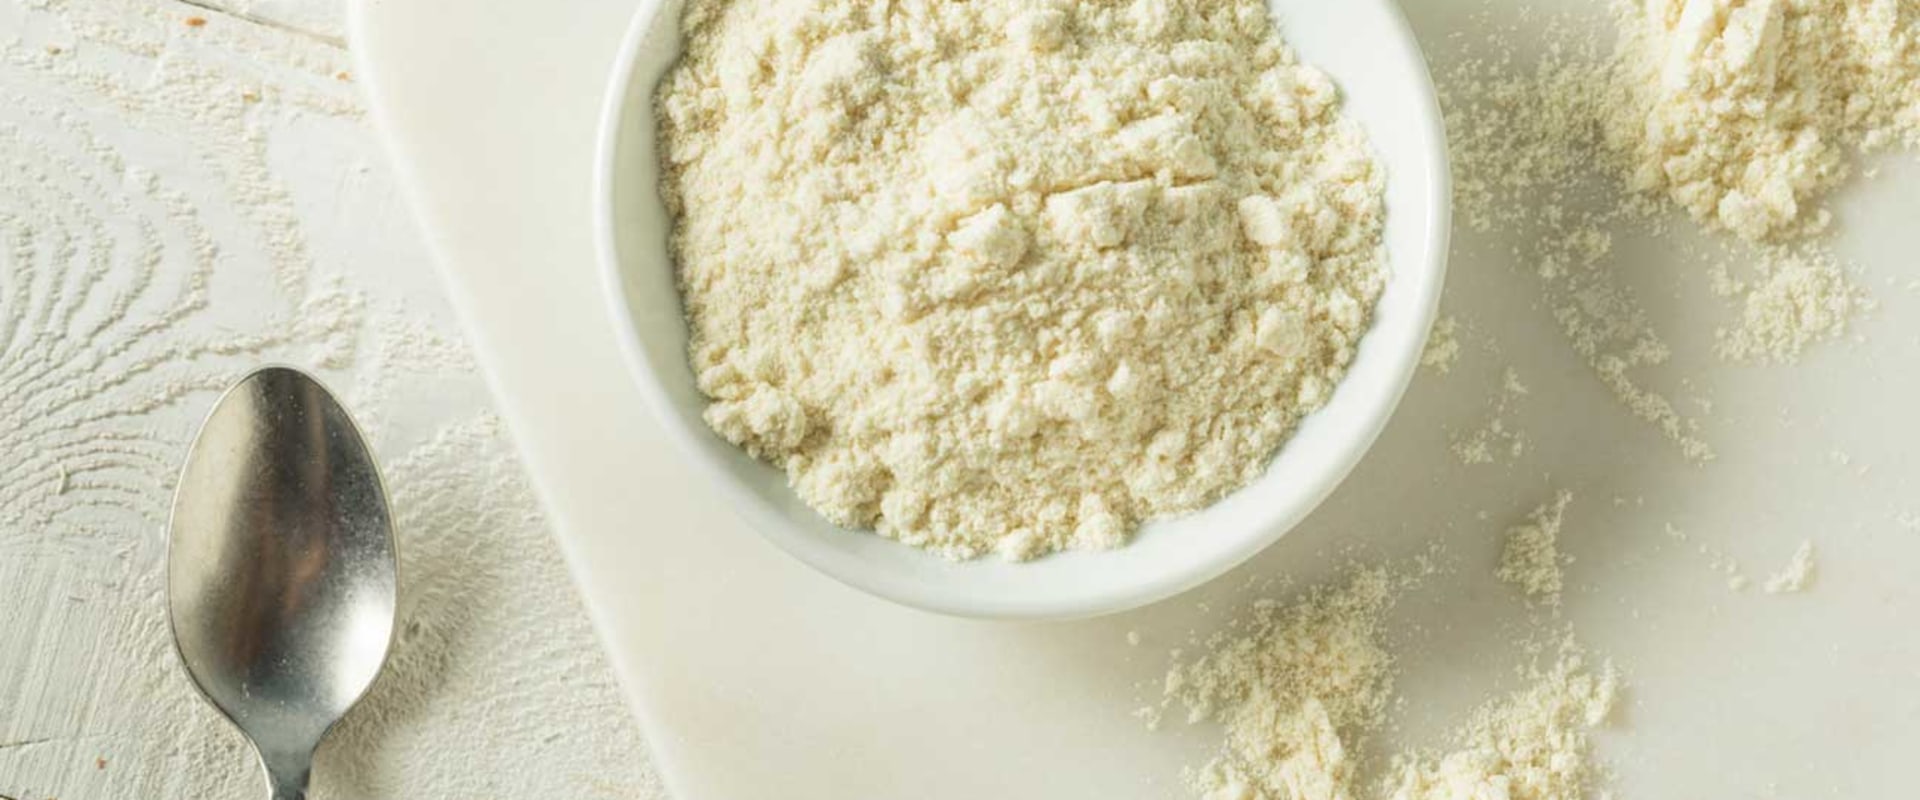 Is Whey Protein Allergenic? 4 Signs to Look Out For